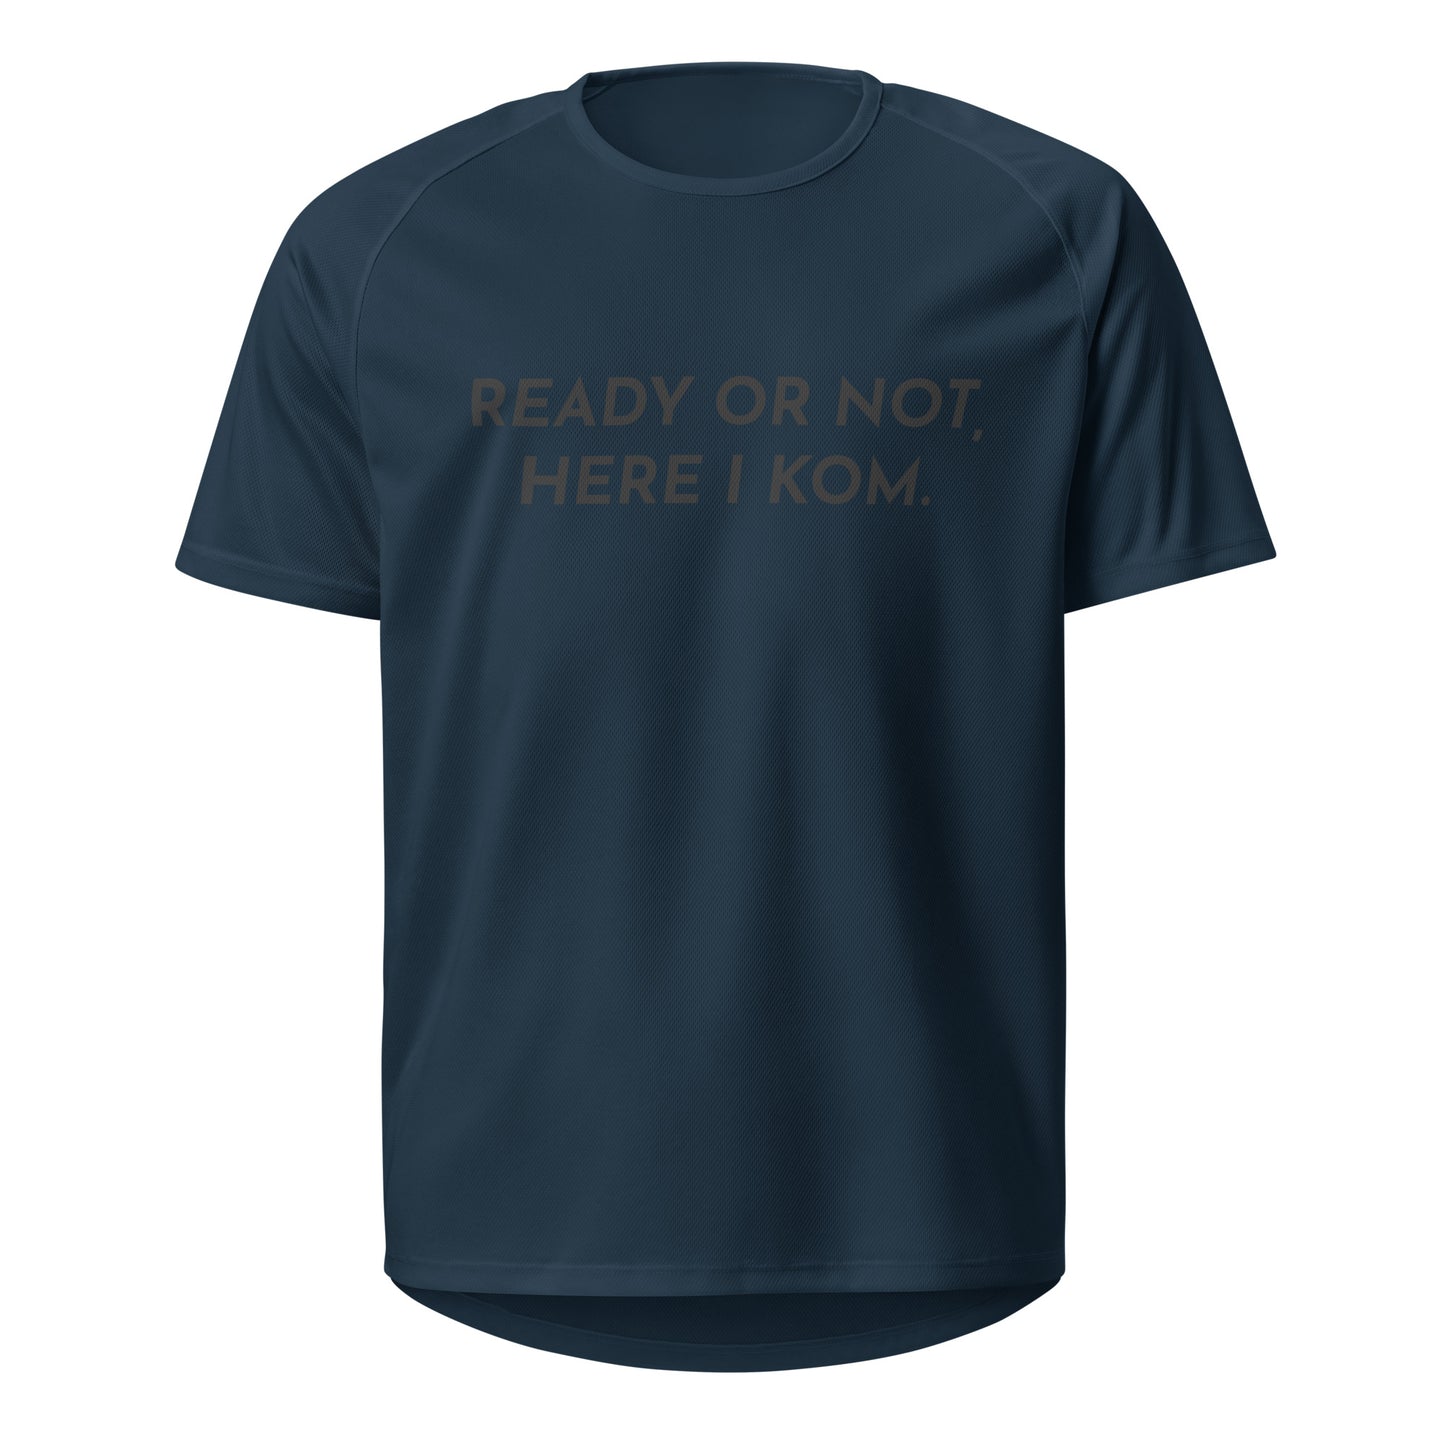 Ready Or Not, Here I KOM, Sports Jersey, Adult Cyclist